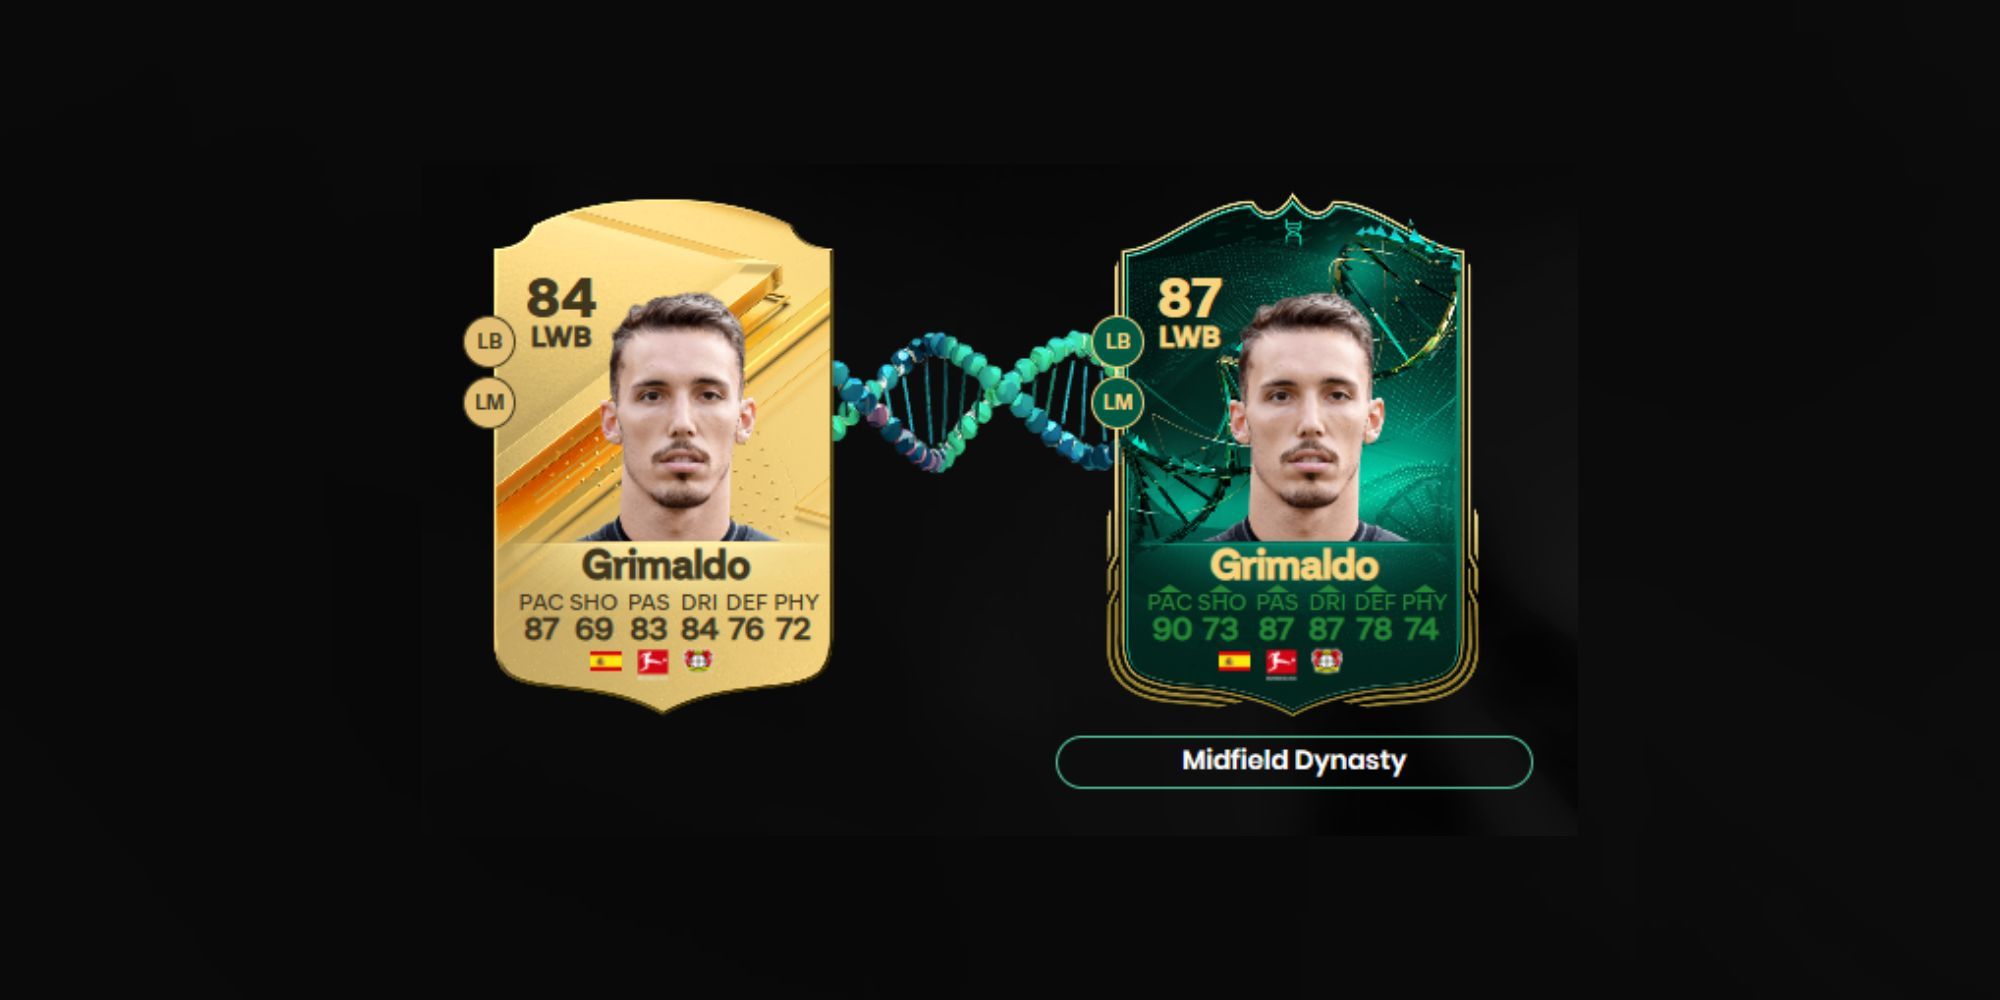 Grimaldo player card showing he is among the best Best Midfield Dynasty Players in EA Sports FC 24